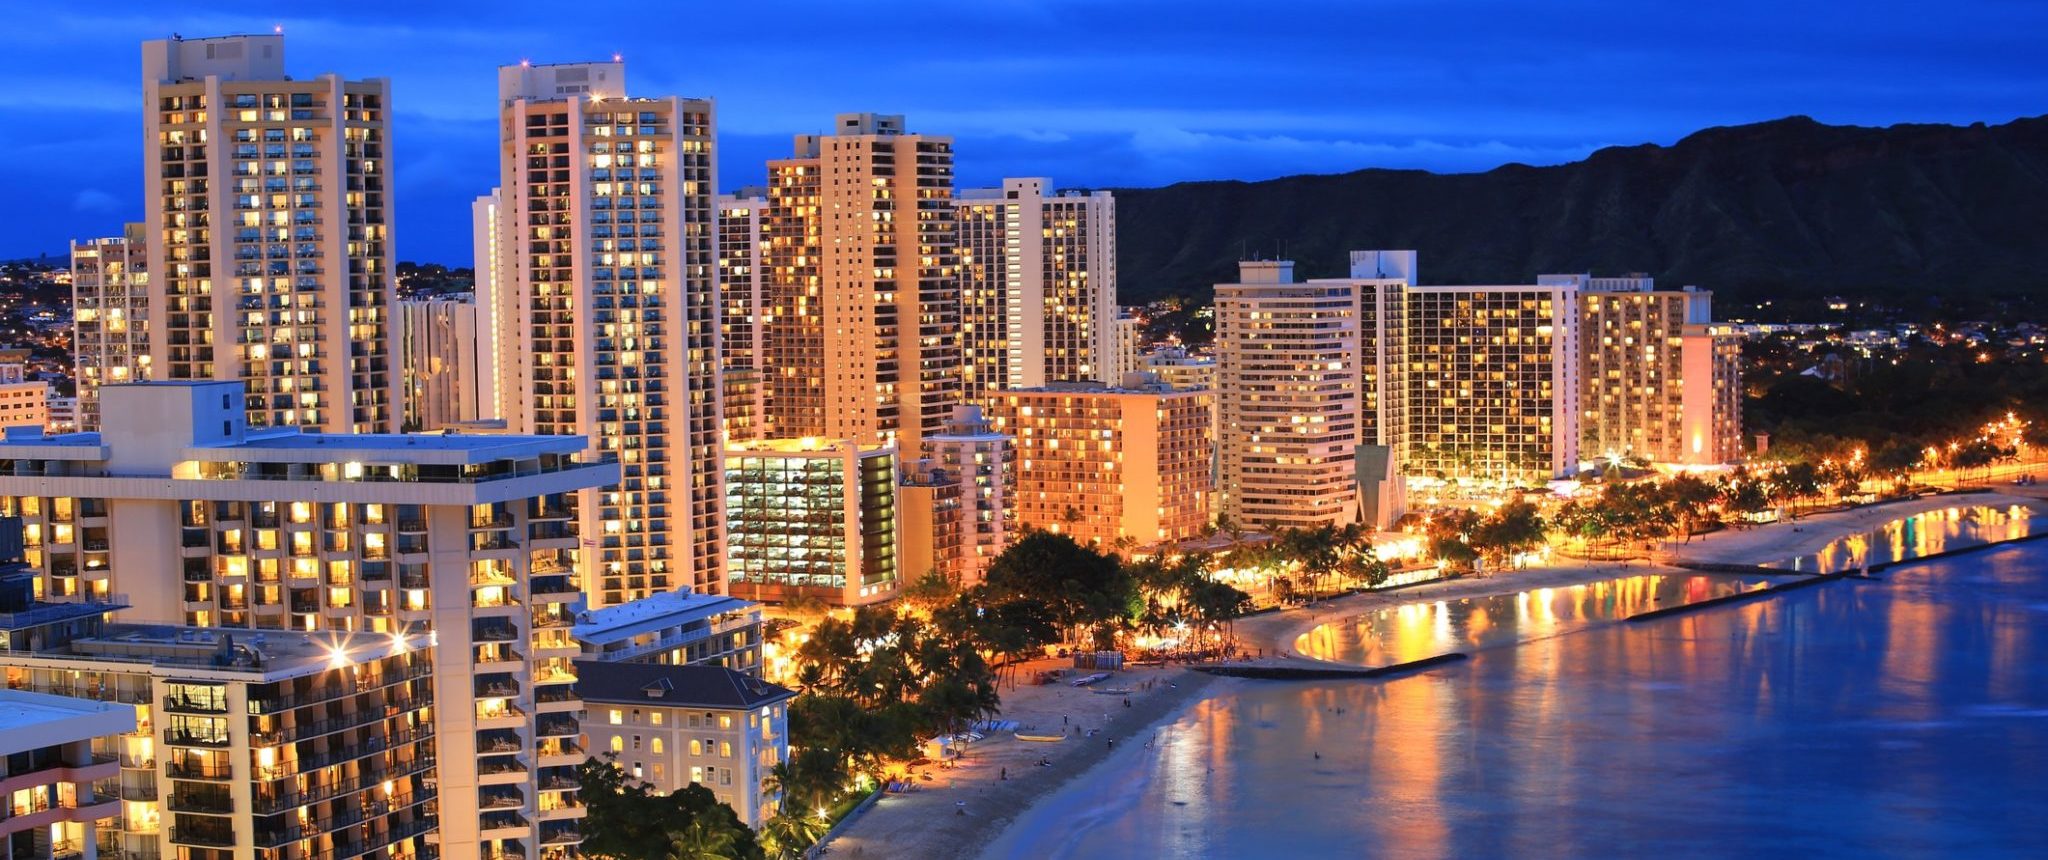 Waikiki Beach with buildings lit up at night.